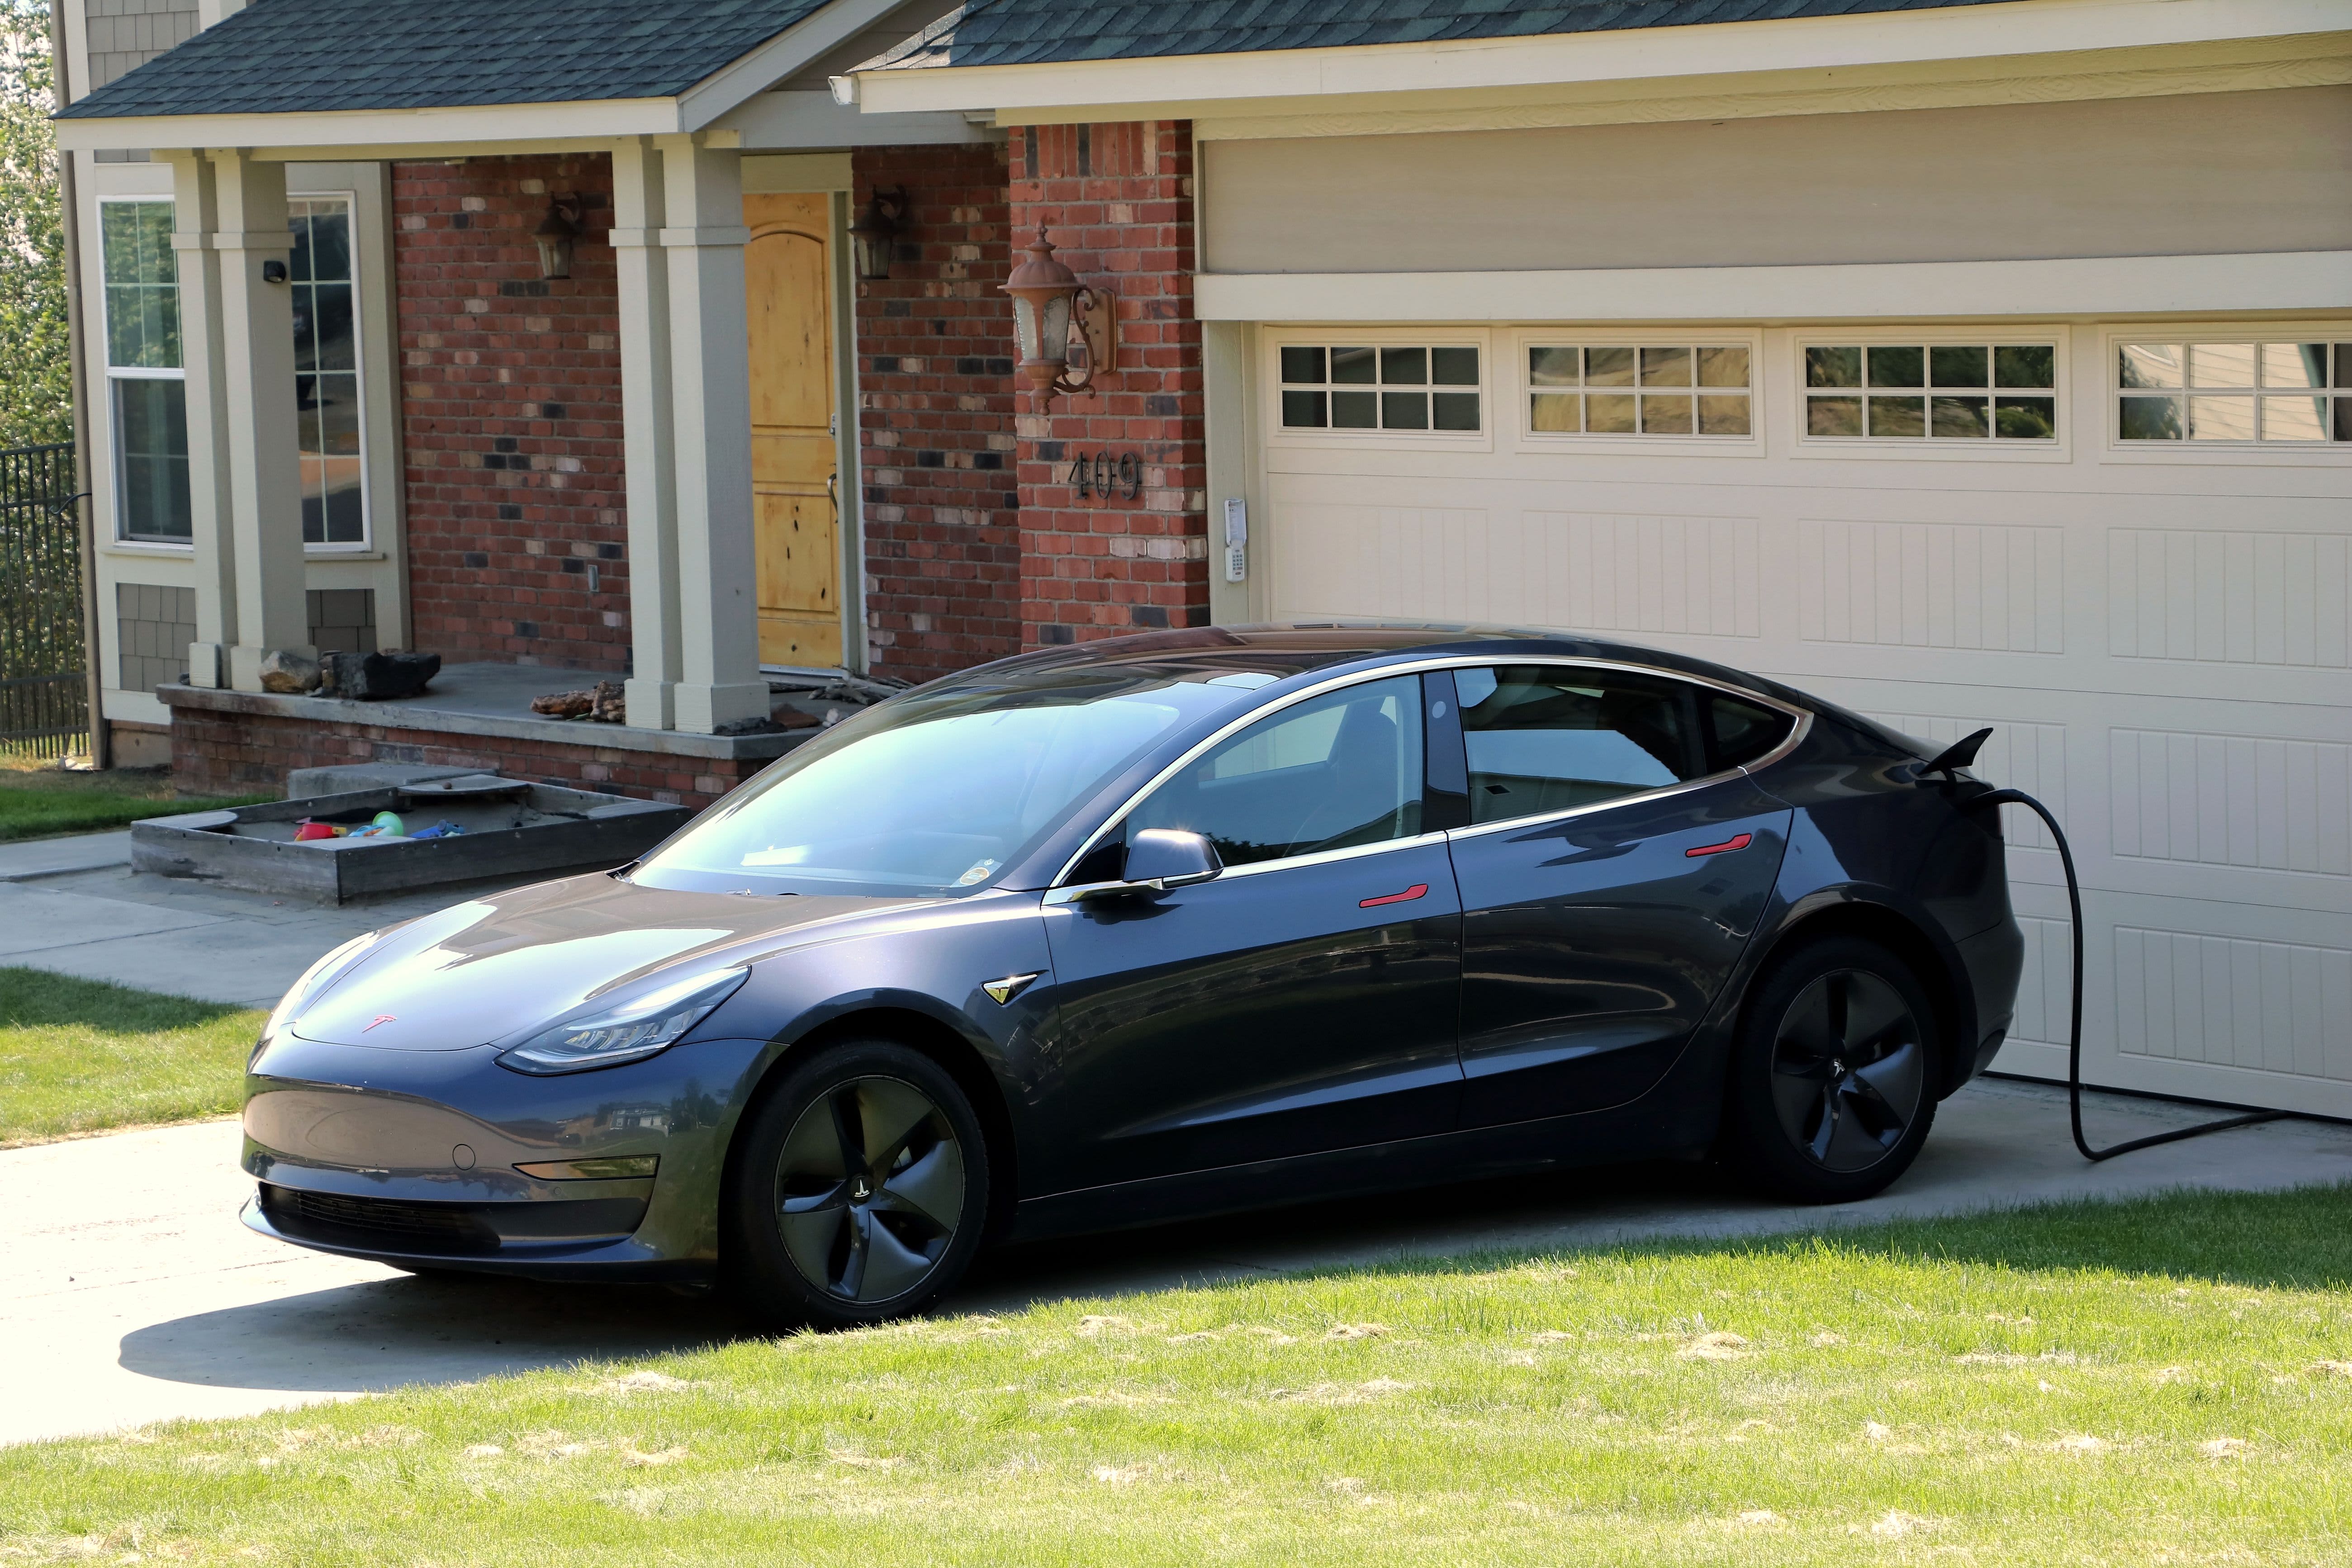 New Tesla Home Charger Works With Non-Tesla Electric Cars